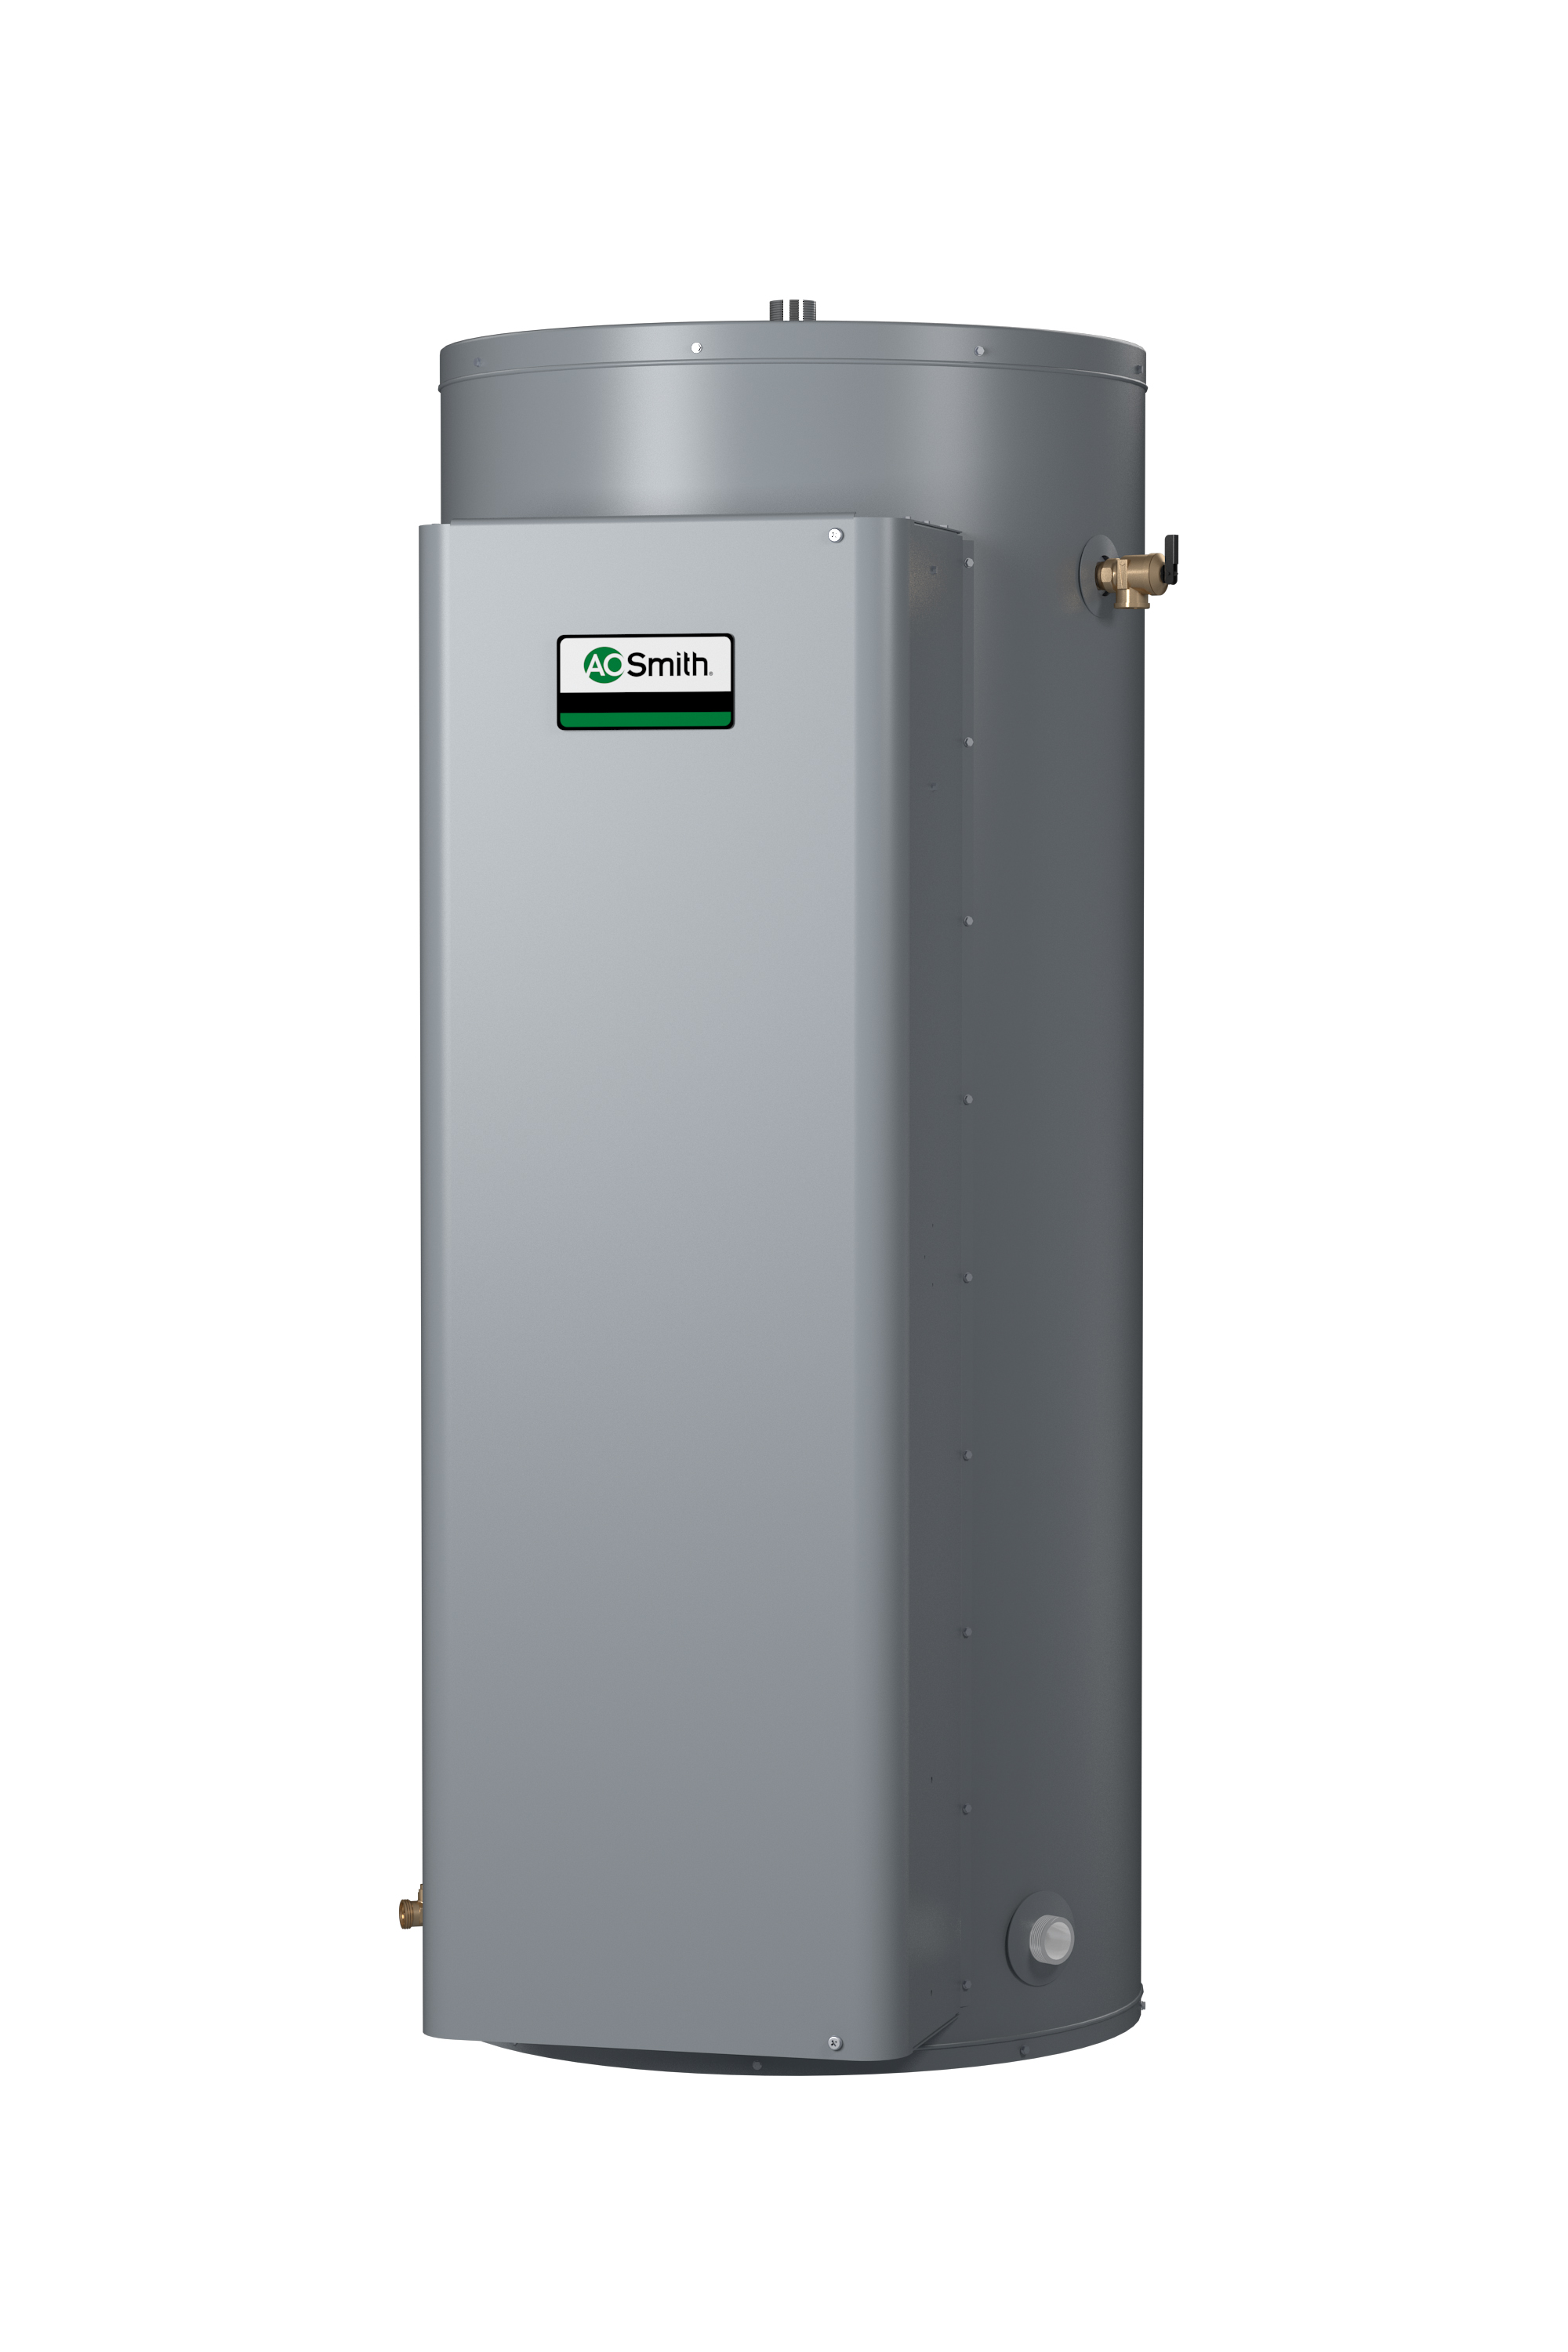 AO SMITH DRE-120-13.5, 119 GALLON, 13.5KW, 277 VOLT, 48.73 AMPS, 1 PHASE, 3 ELEMENT, COMMERCIAL ELECTRIC WATER HEATER, GOLD SERIES